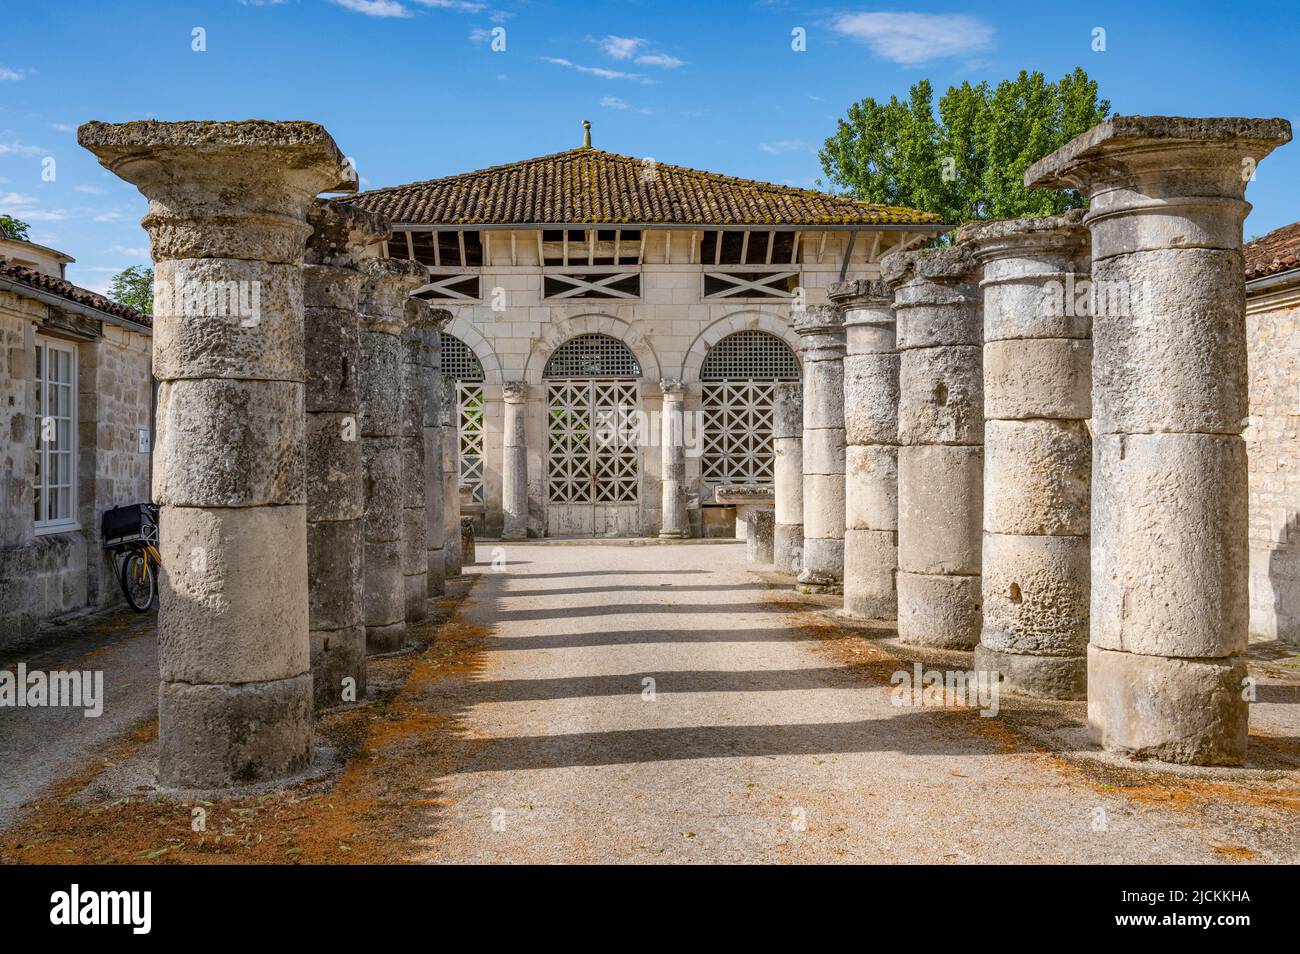 Pillars line the former entrance to the Archaeological Museum. It recalls the Roman past of the city on the banks of the Charente river in France Stock Photo